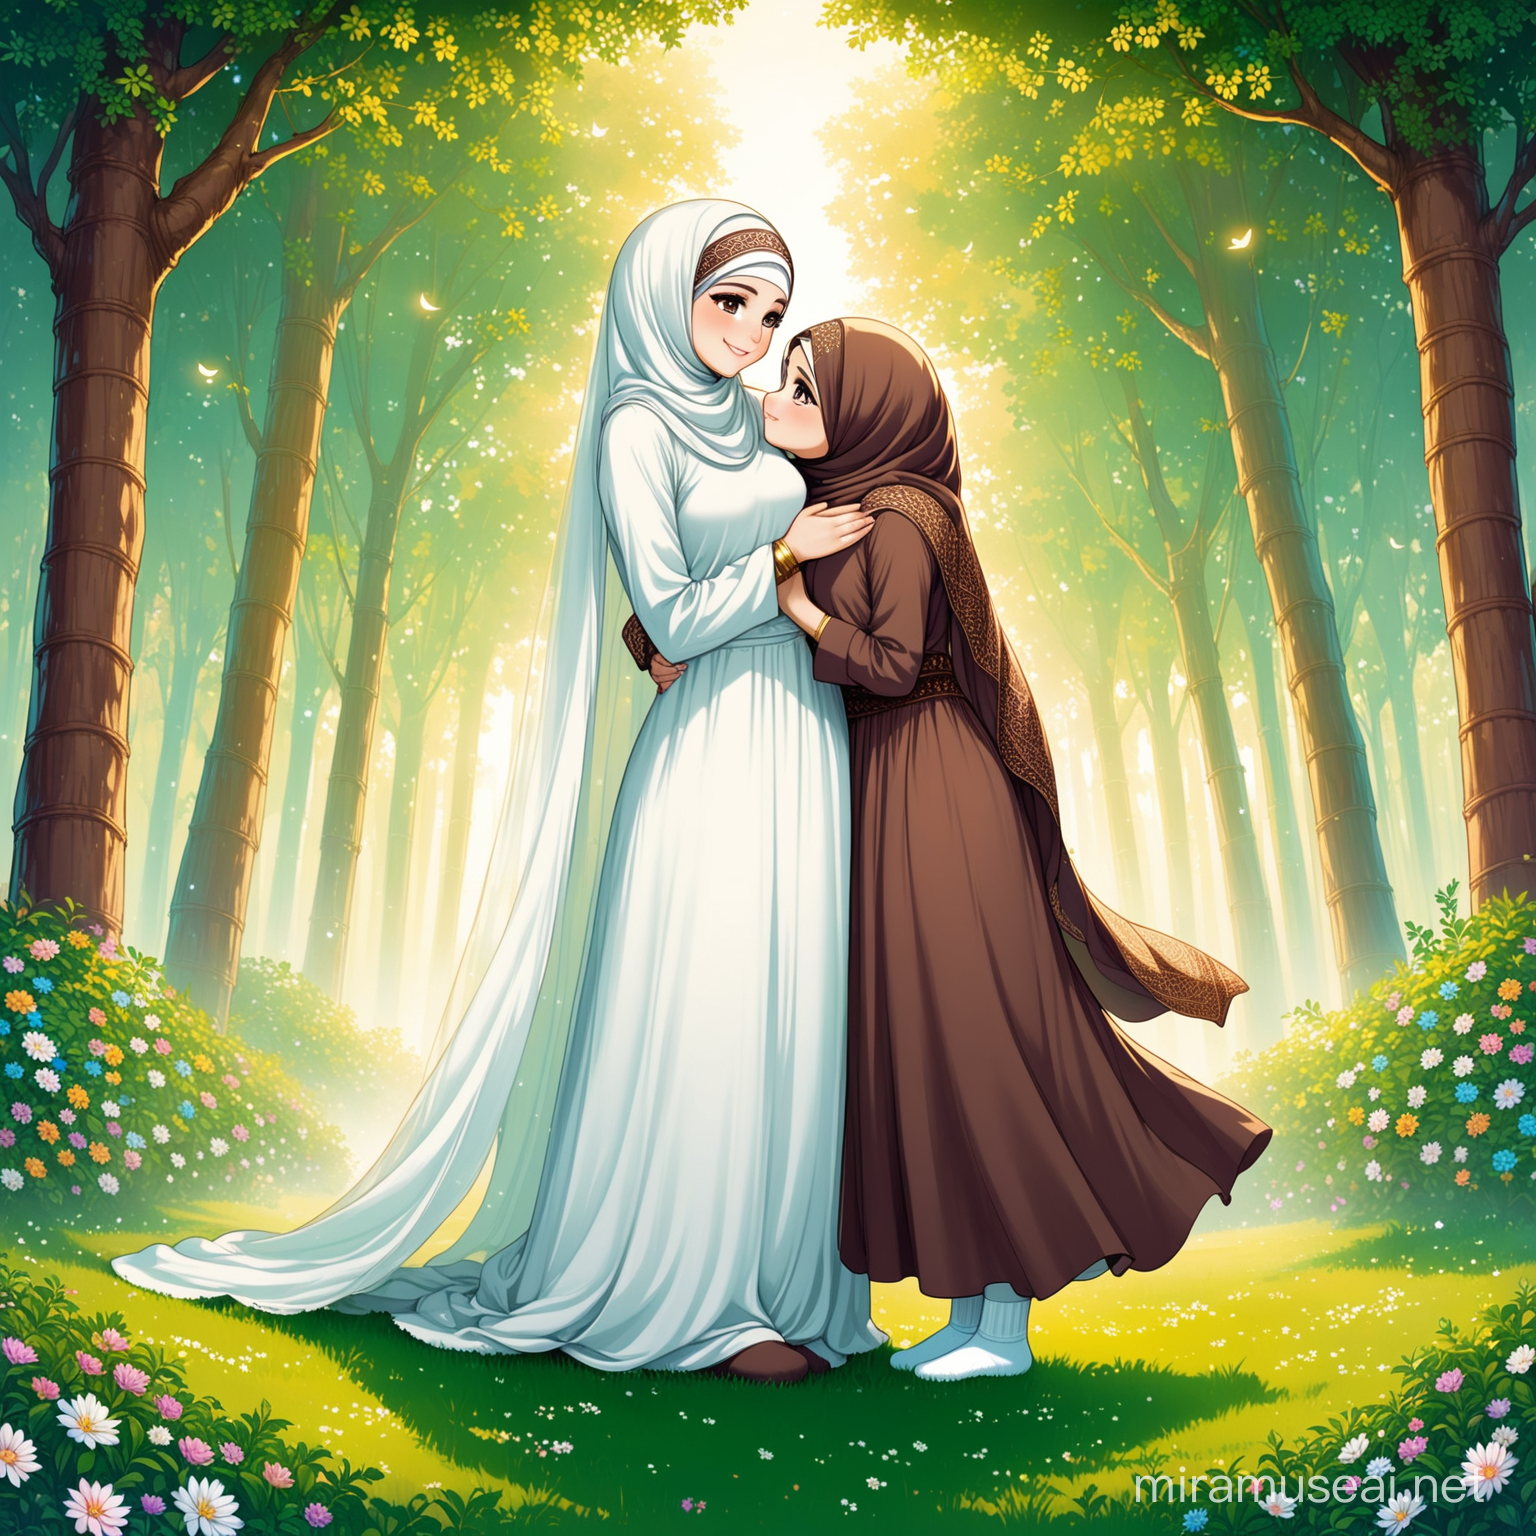 Character Persian girl(full height, Muslim, with emphasis no hair out of veil(Hijab), smaller eyes, bigger nose, white skin, cute, smiling, wearing socks, clothes full of Persian designs) is kissing on the hand of father(not Muslim nor Arab, without head cover nor hat).

Atmosphere forest, grass flowers, etc...